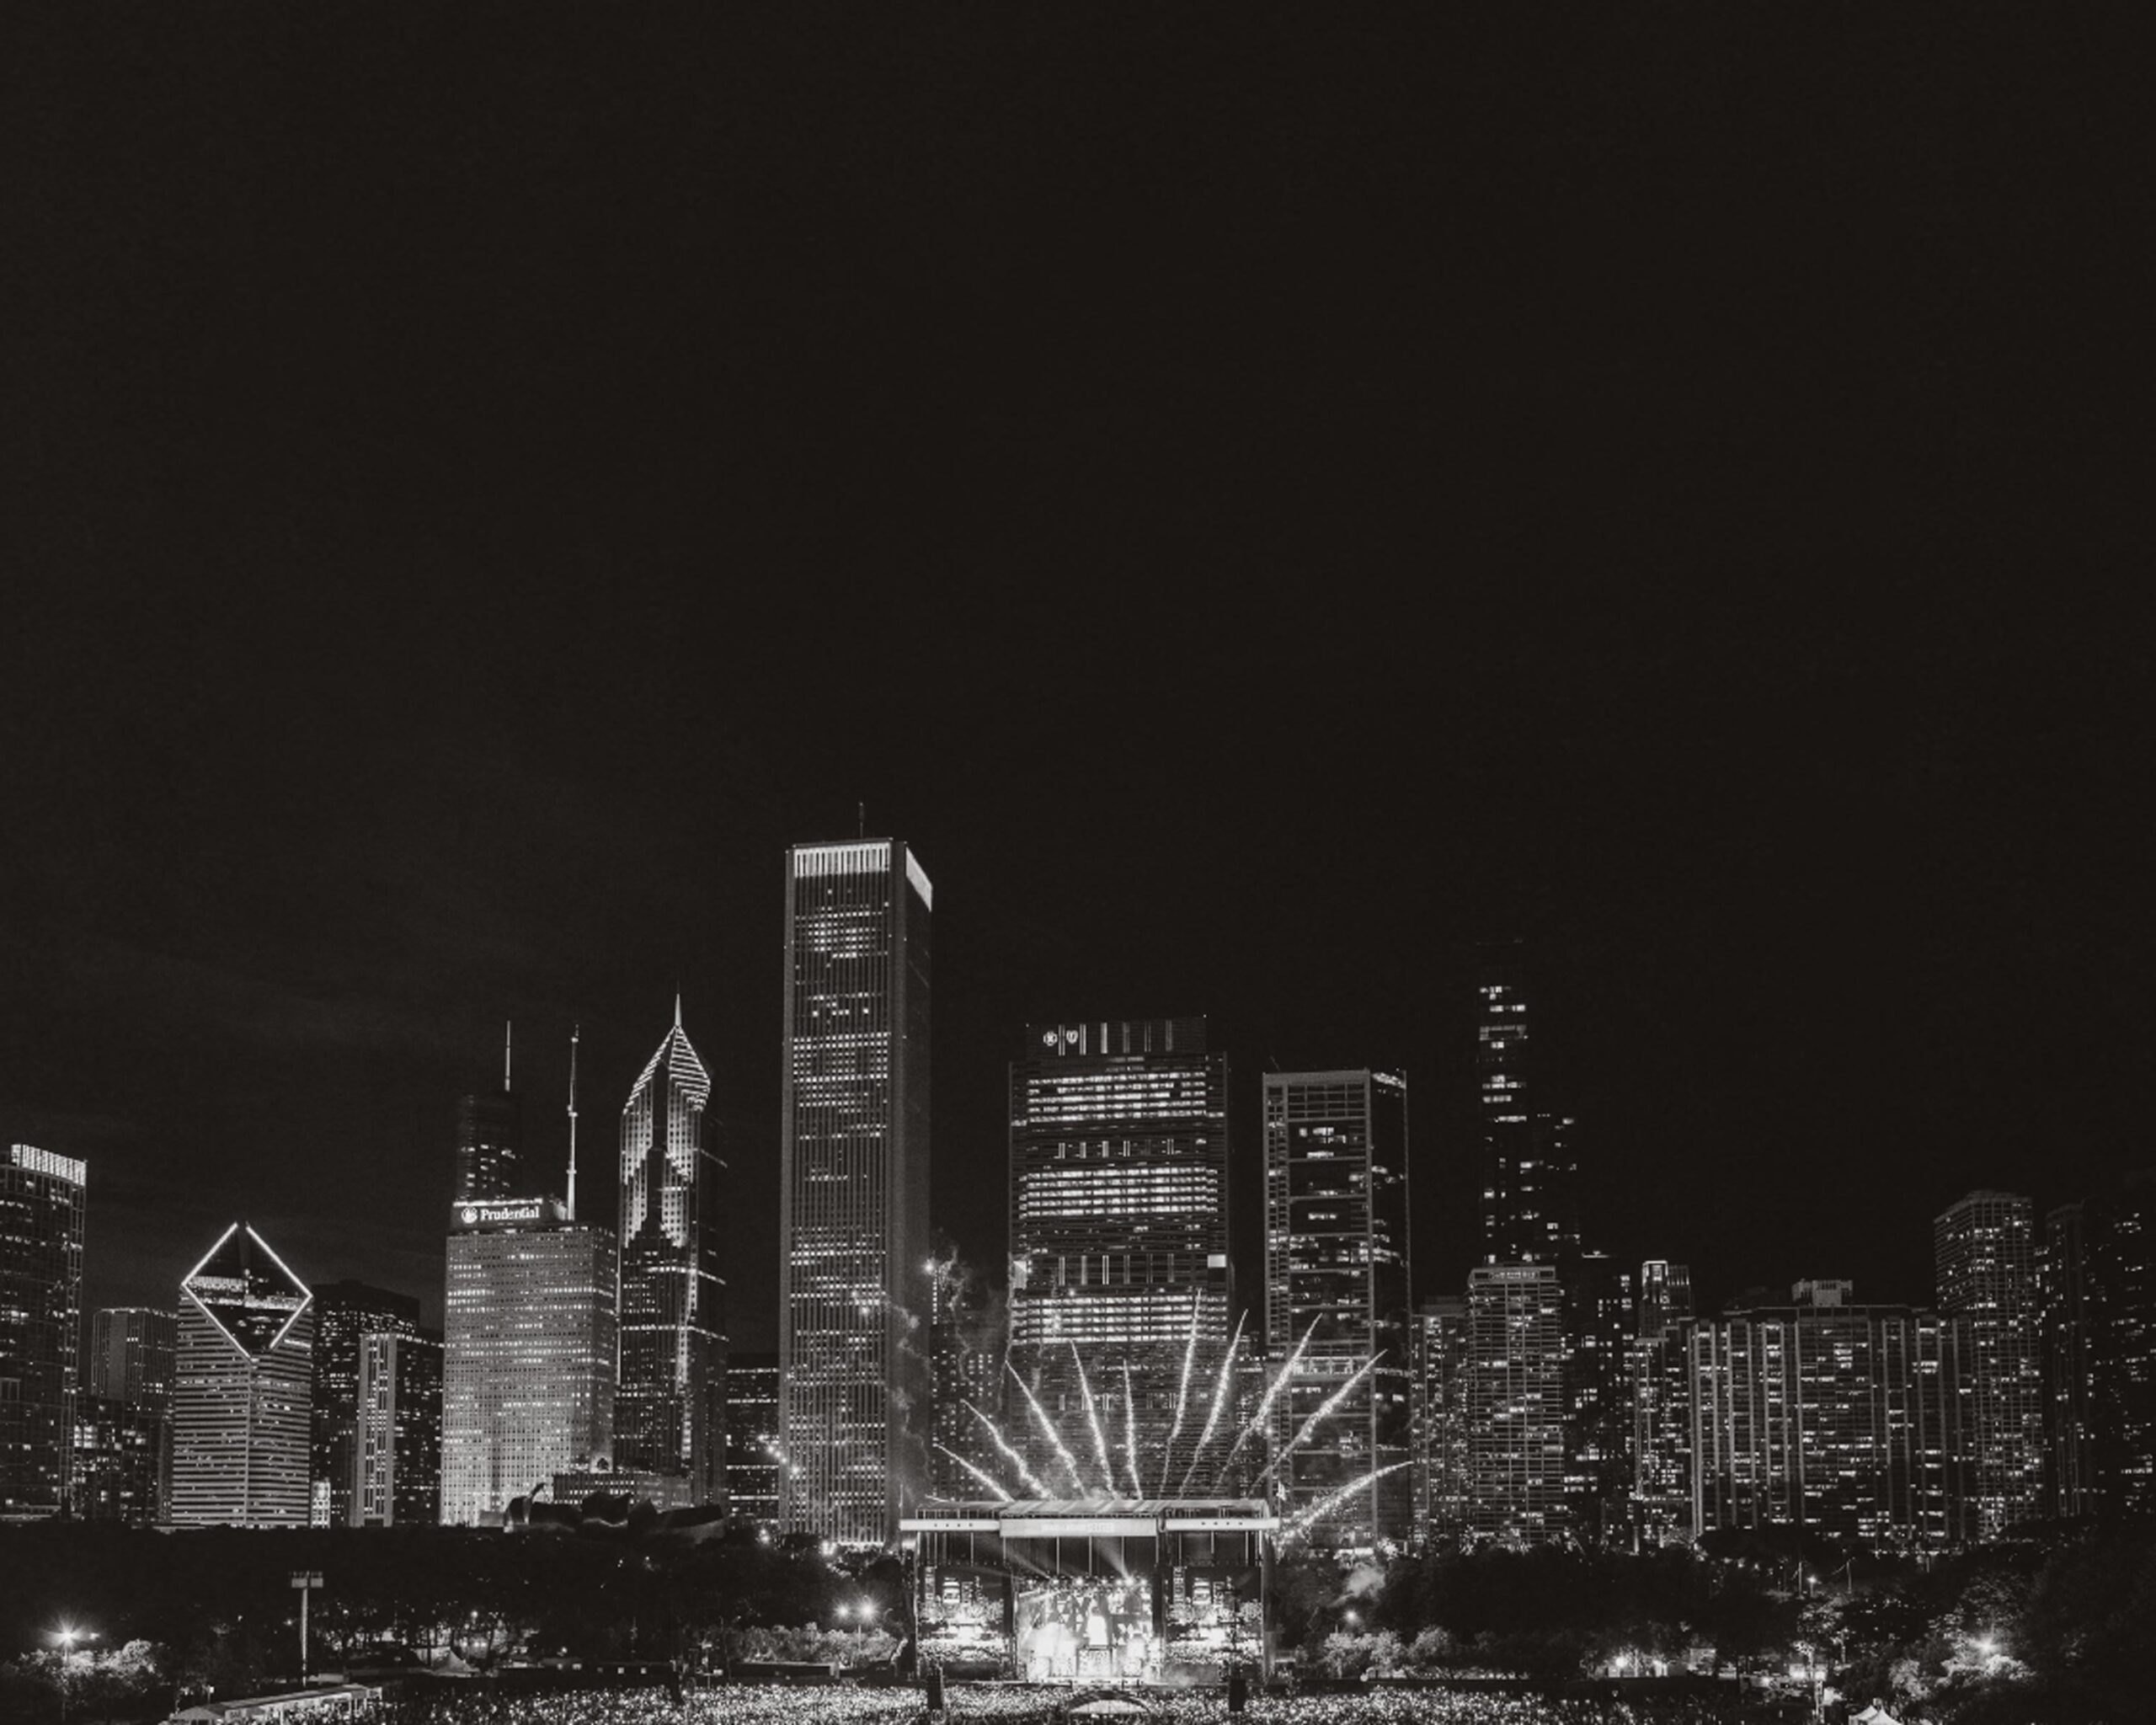 Black-and-white image of a cityscape at night featuring tall, illuminated buildings. Bright lights radiate from a central structure, creating a dramatic effect over a gathering of people below.